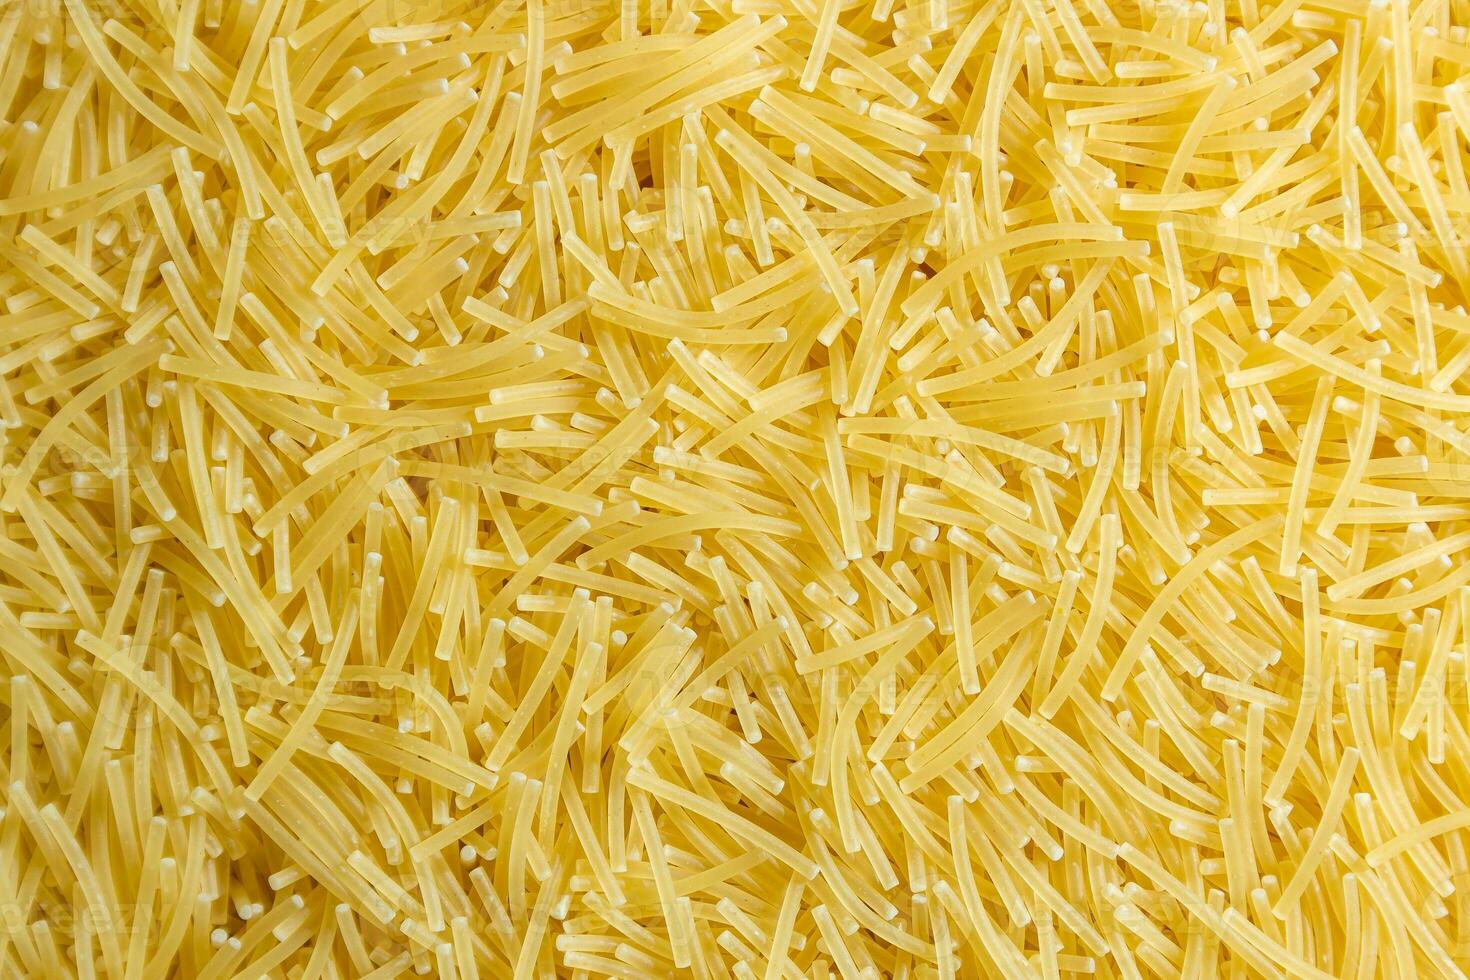 Uncooked Filini Pasta. A Culinary Canvas of Noodles, Creating a Lively and Textured Background for Gourmet Cooking. Dry Pasta. Raw Macaroni - Top View, Flat Lay photo